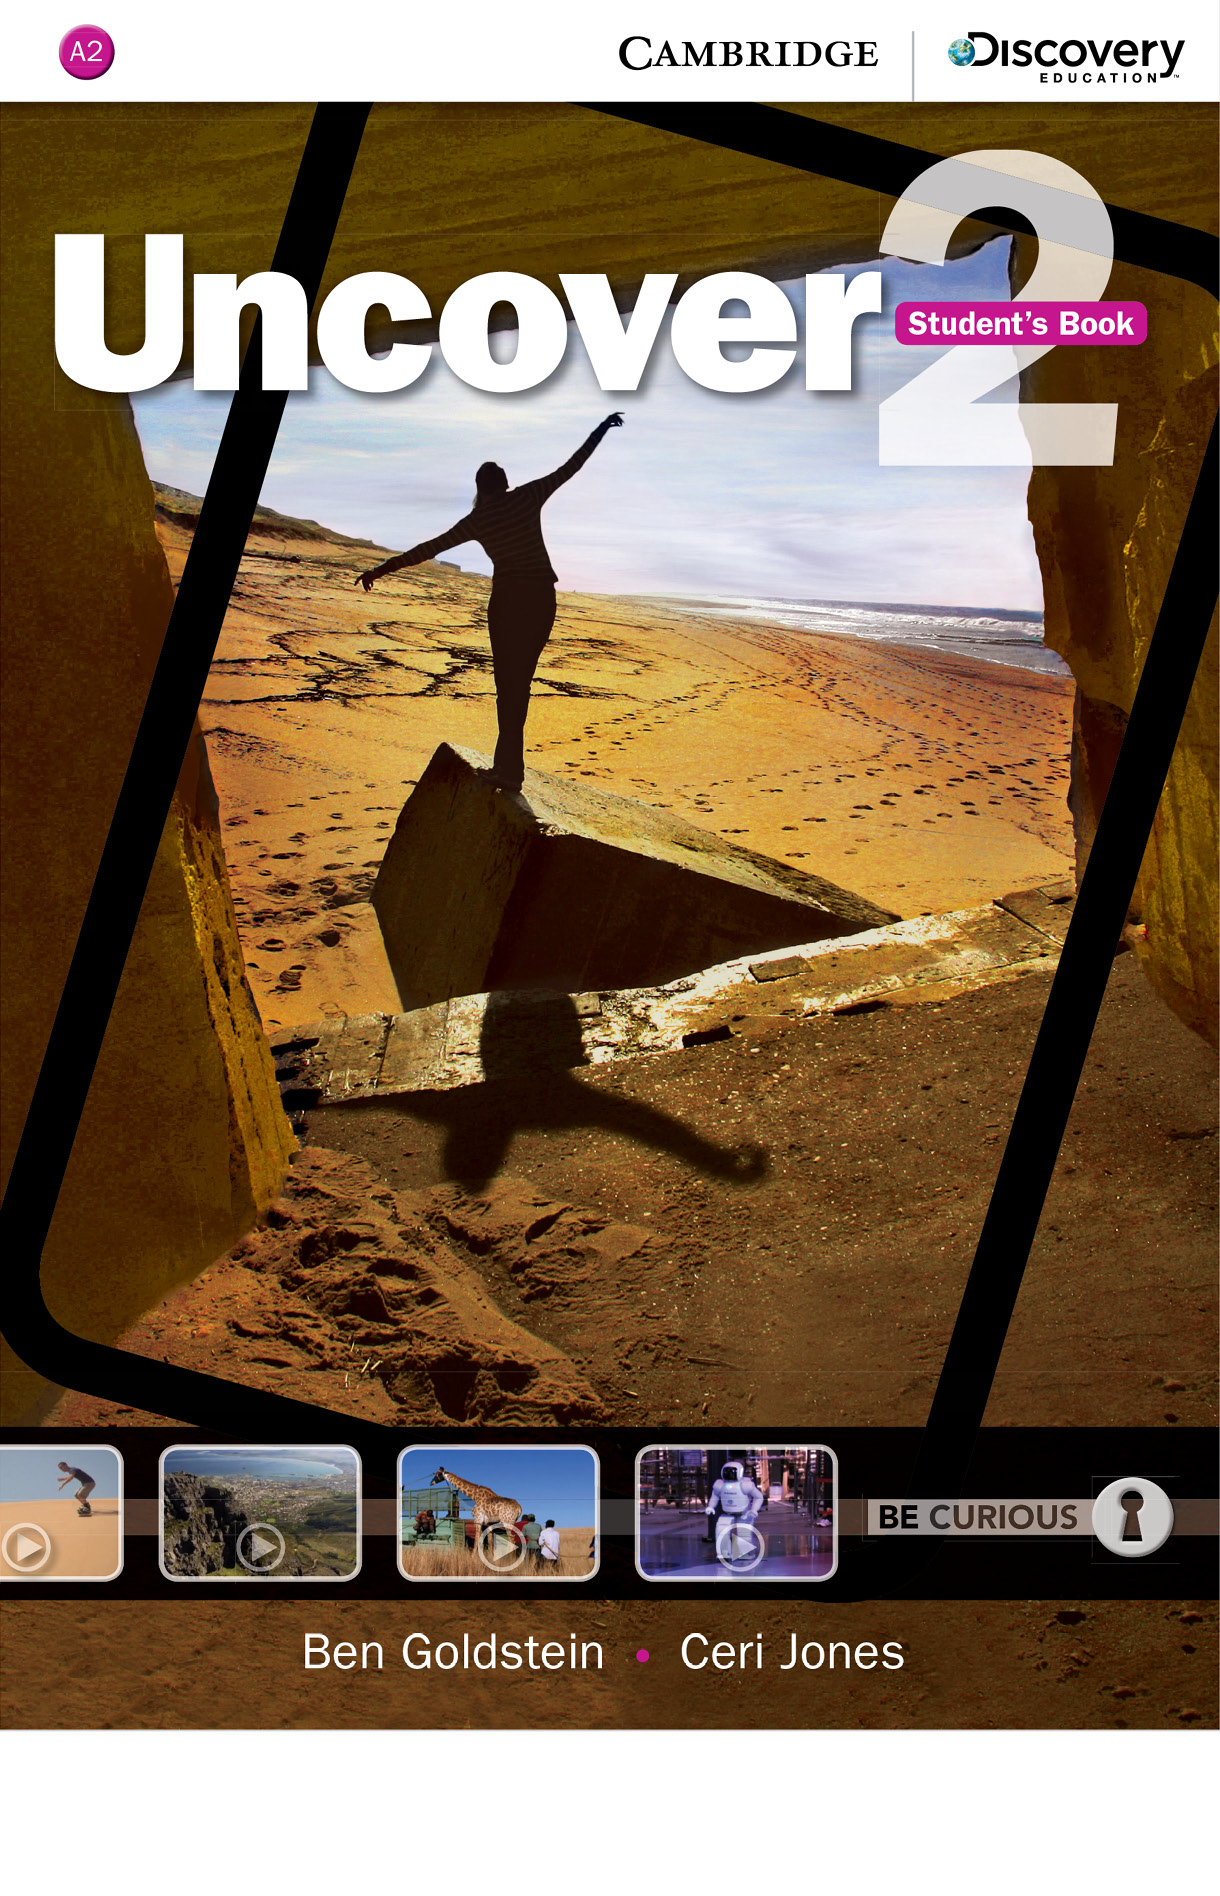 Book cover for Uncover student's book volume 2 . It has a person balancing on a slanted rock in the desert.